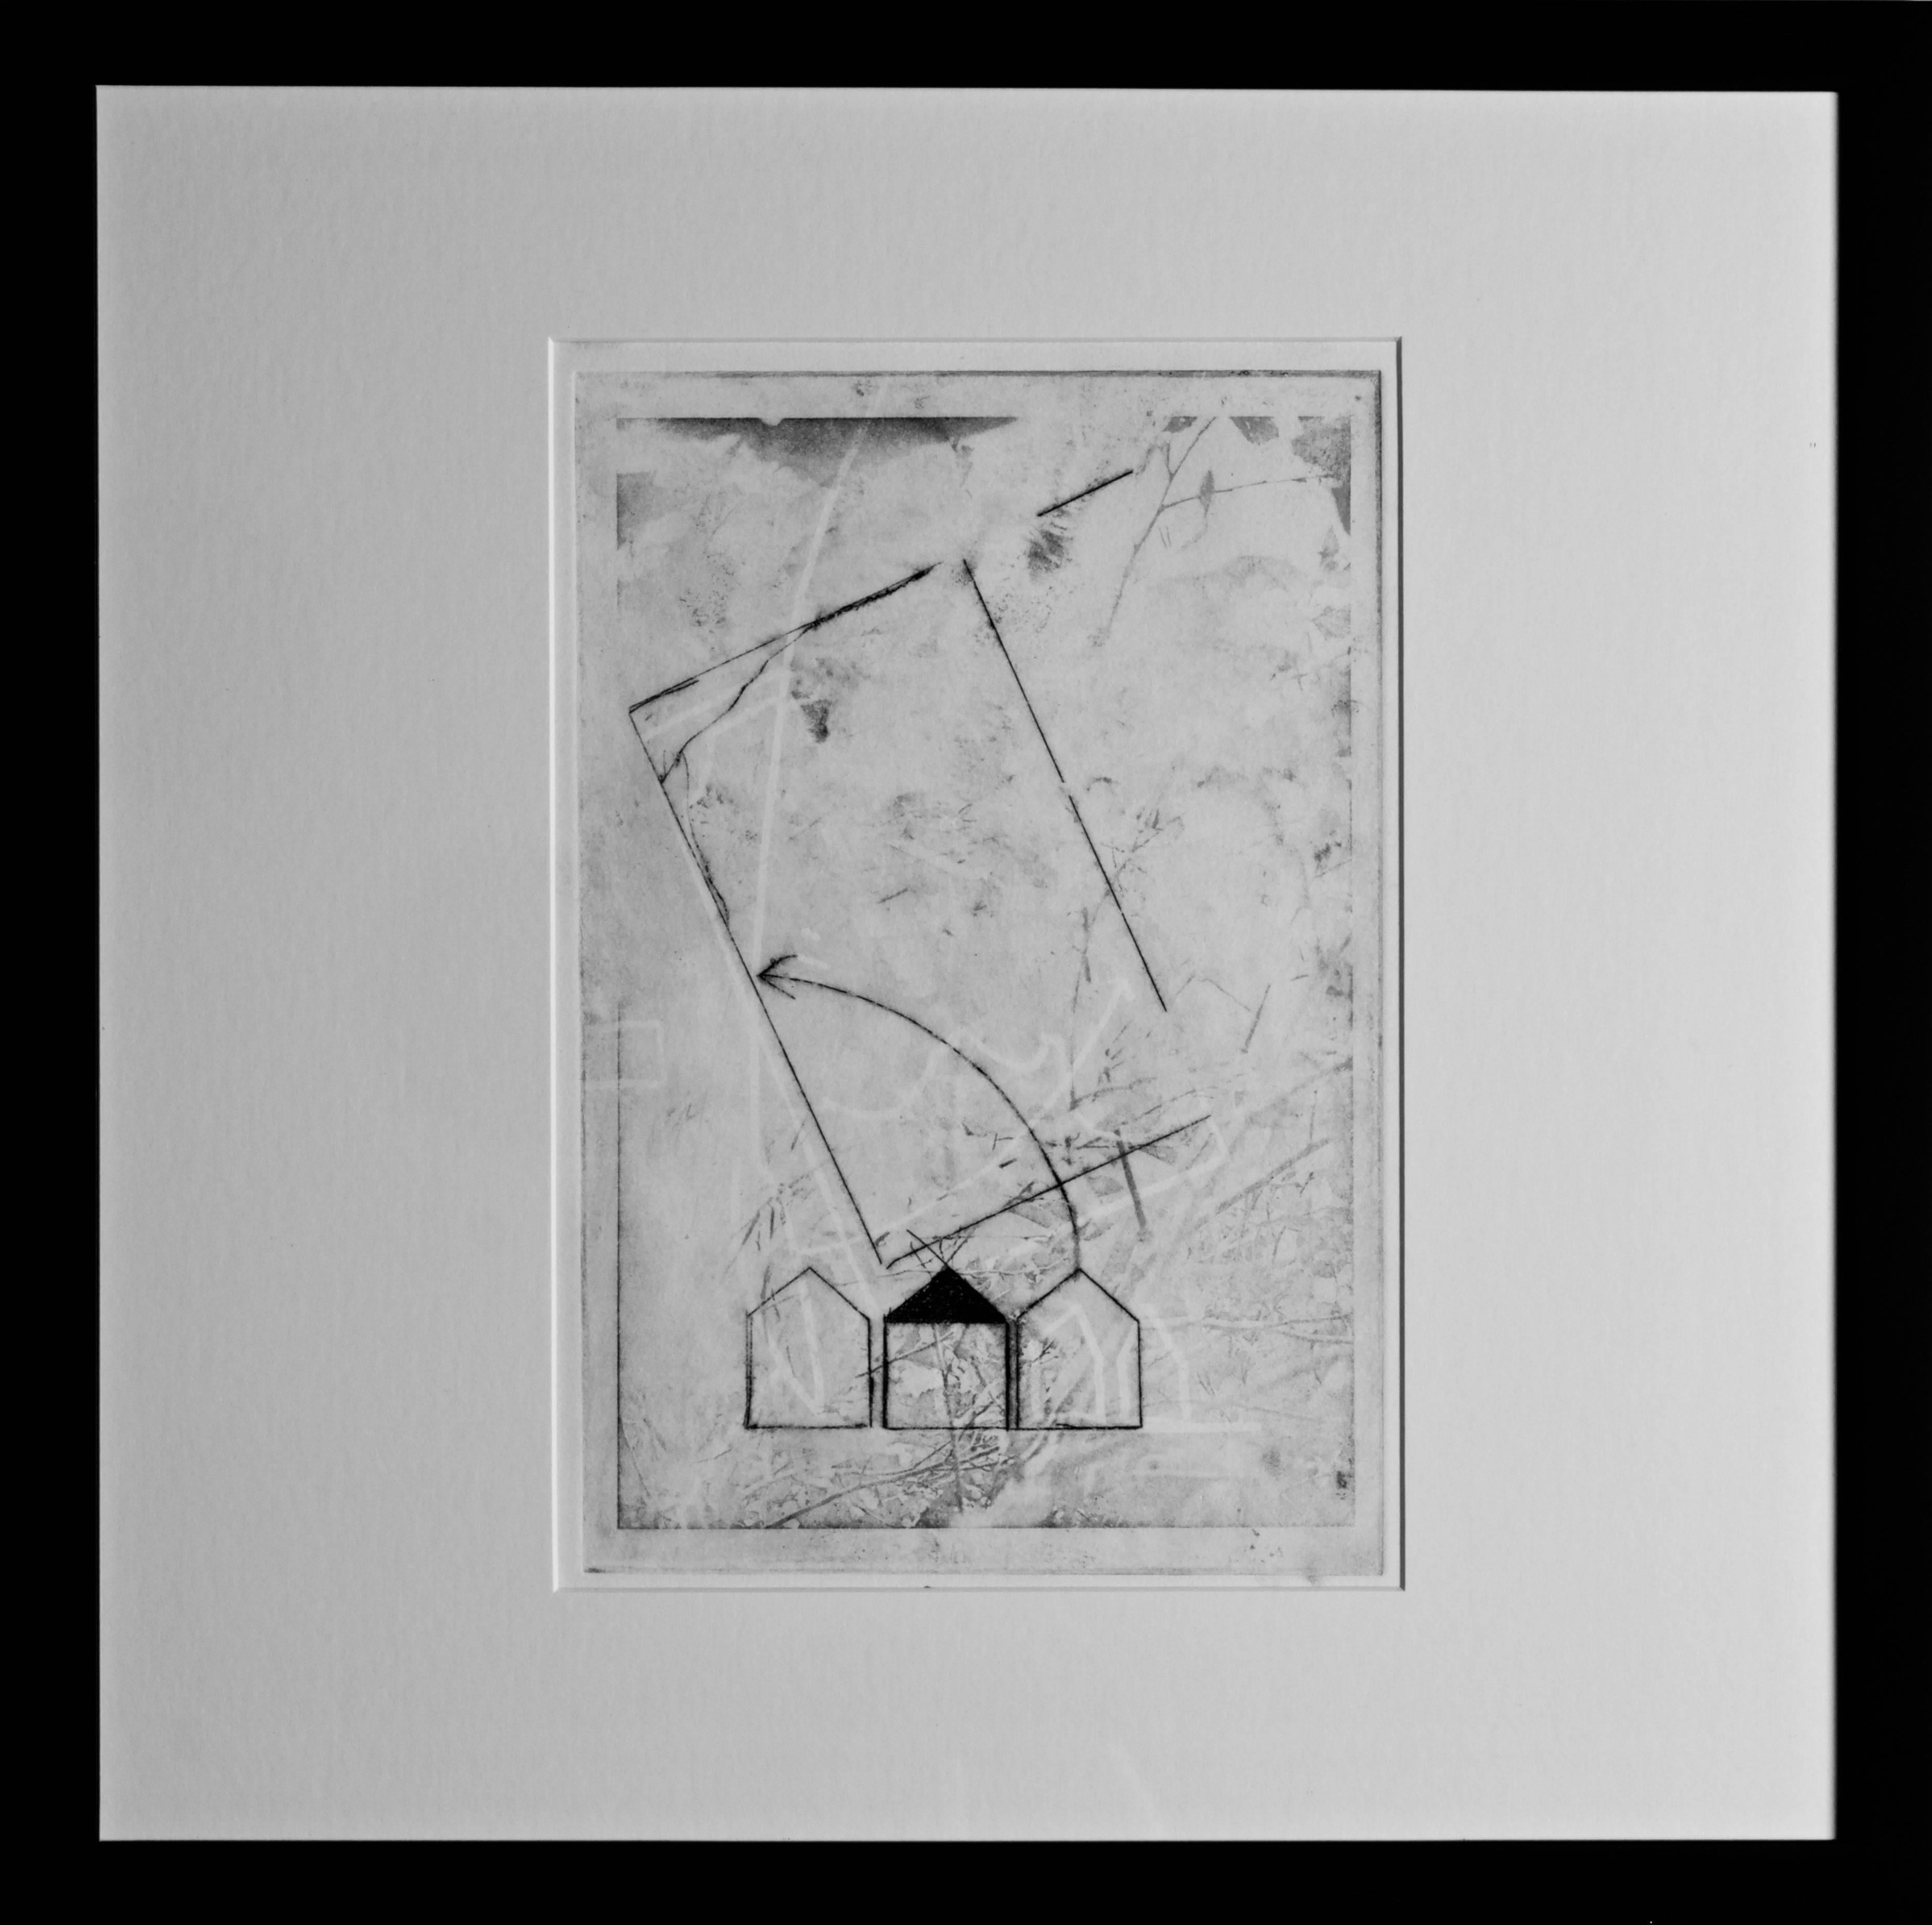 Robert Reynolds Abstract Print - "Red Beach Sector, Palo, Leyte" - Abstract Drypoint Etching